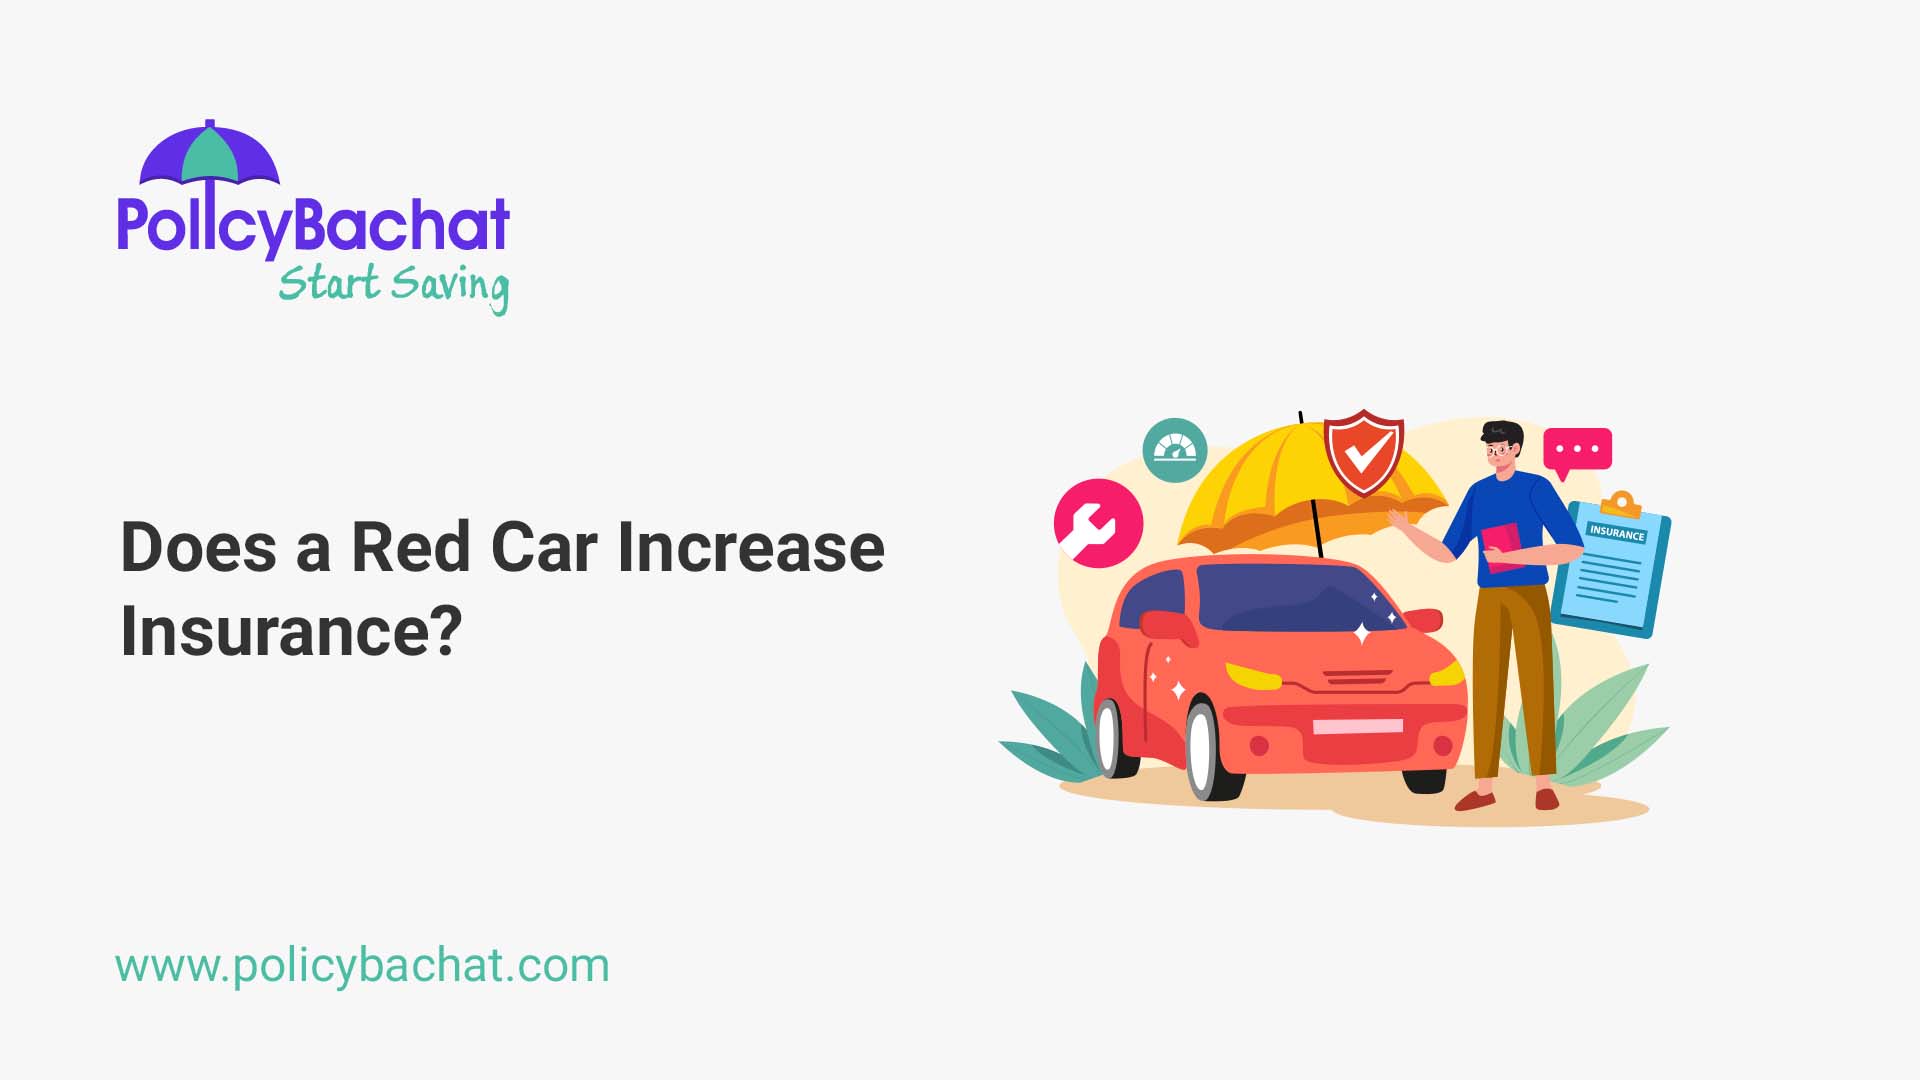 Does a Red Car Increase Insurance? PolicyBachat